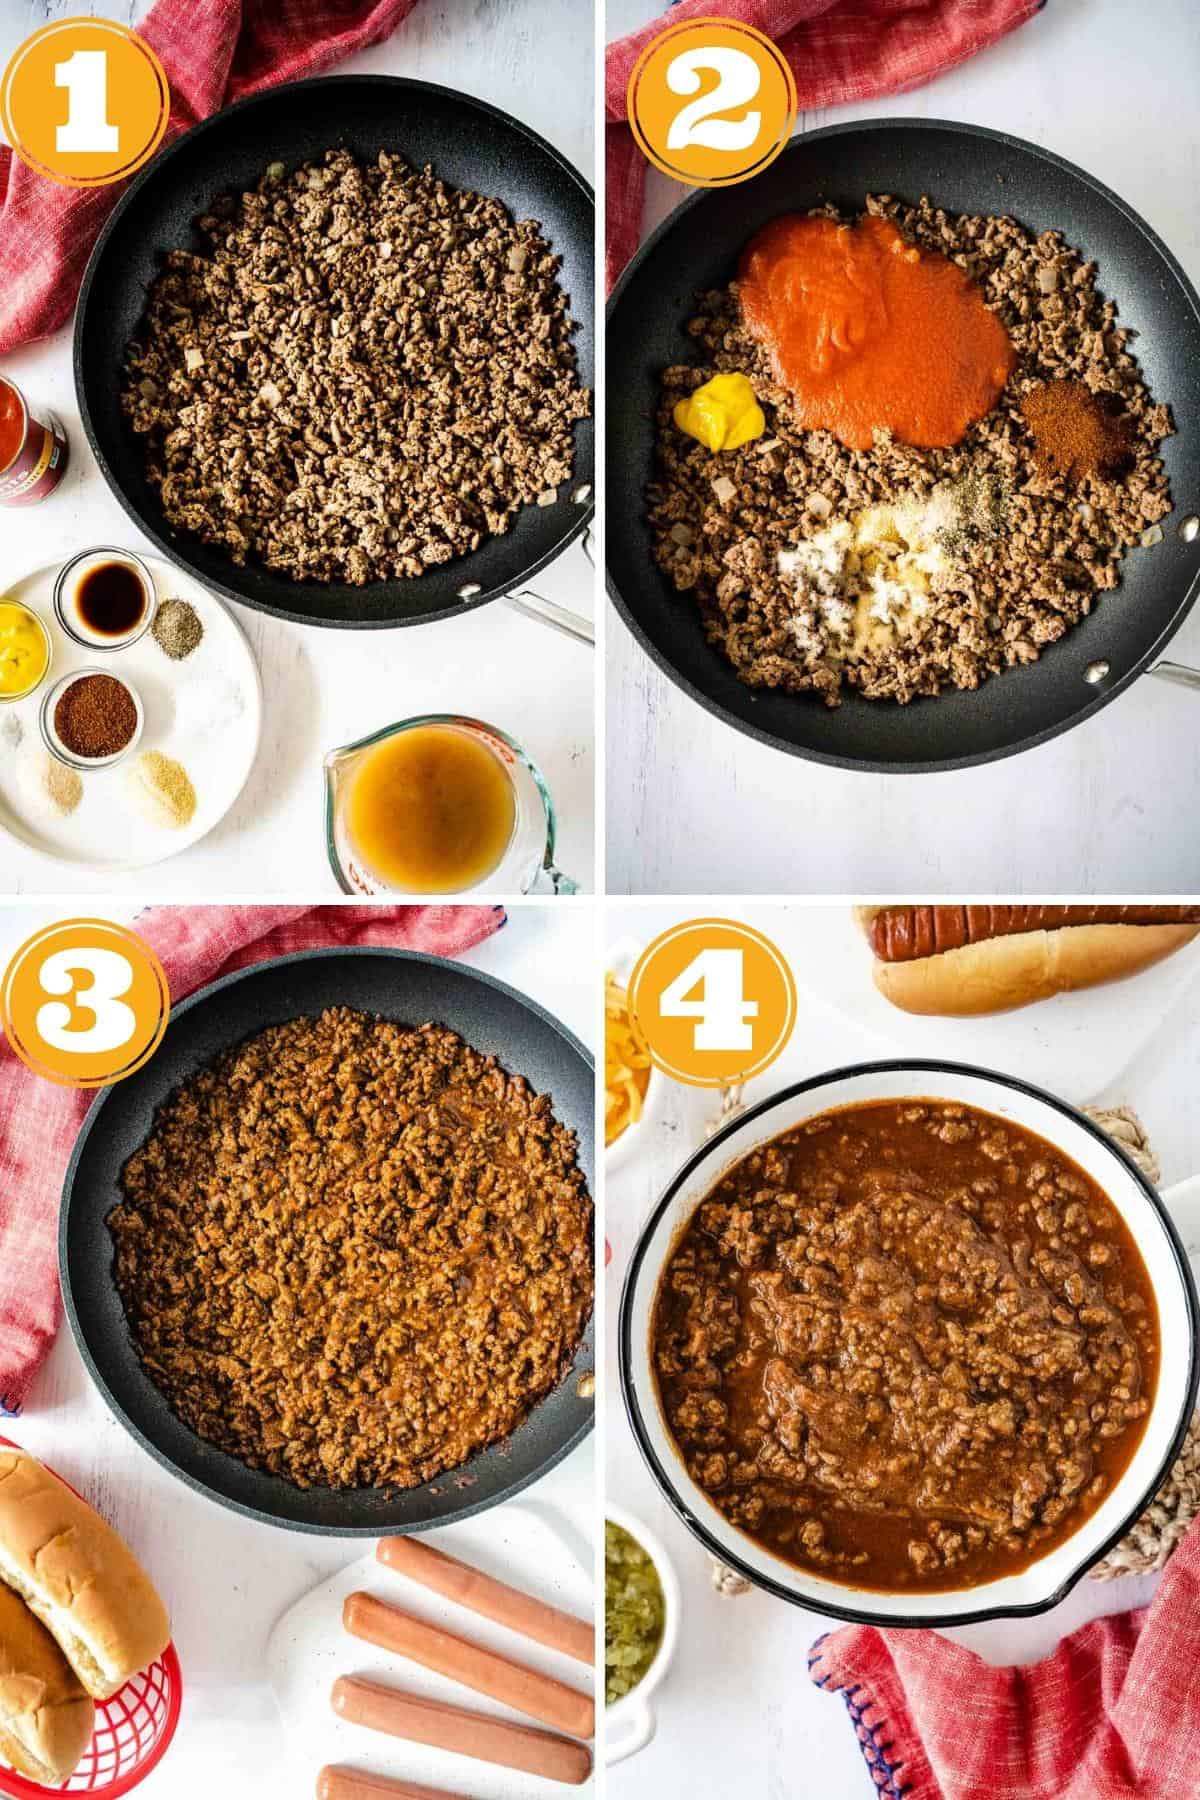 Step by step images of cooked ground beef and onions, adding remaining ingredients to ground beef mixture, simmering sauce in skillet, and sauce served in white saucepan.